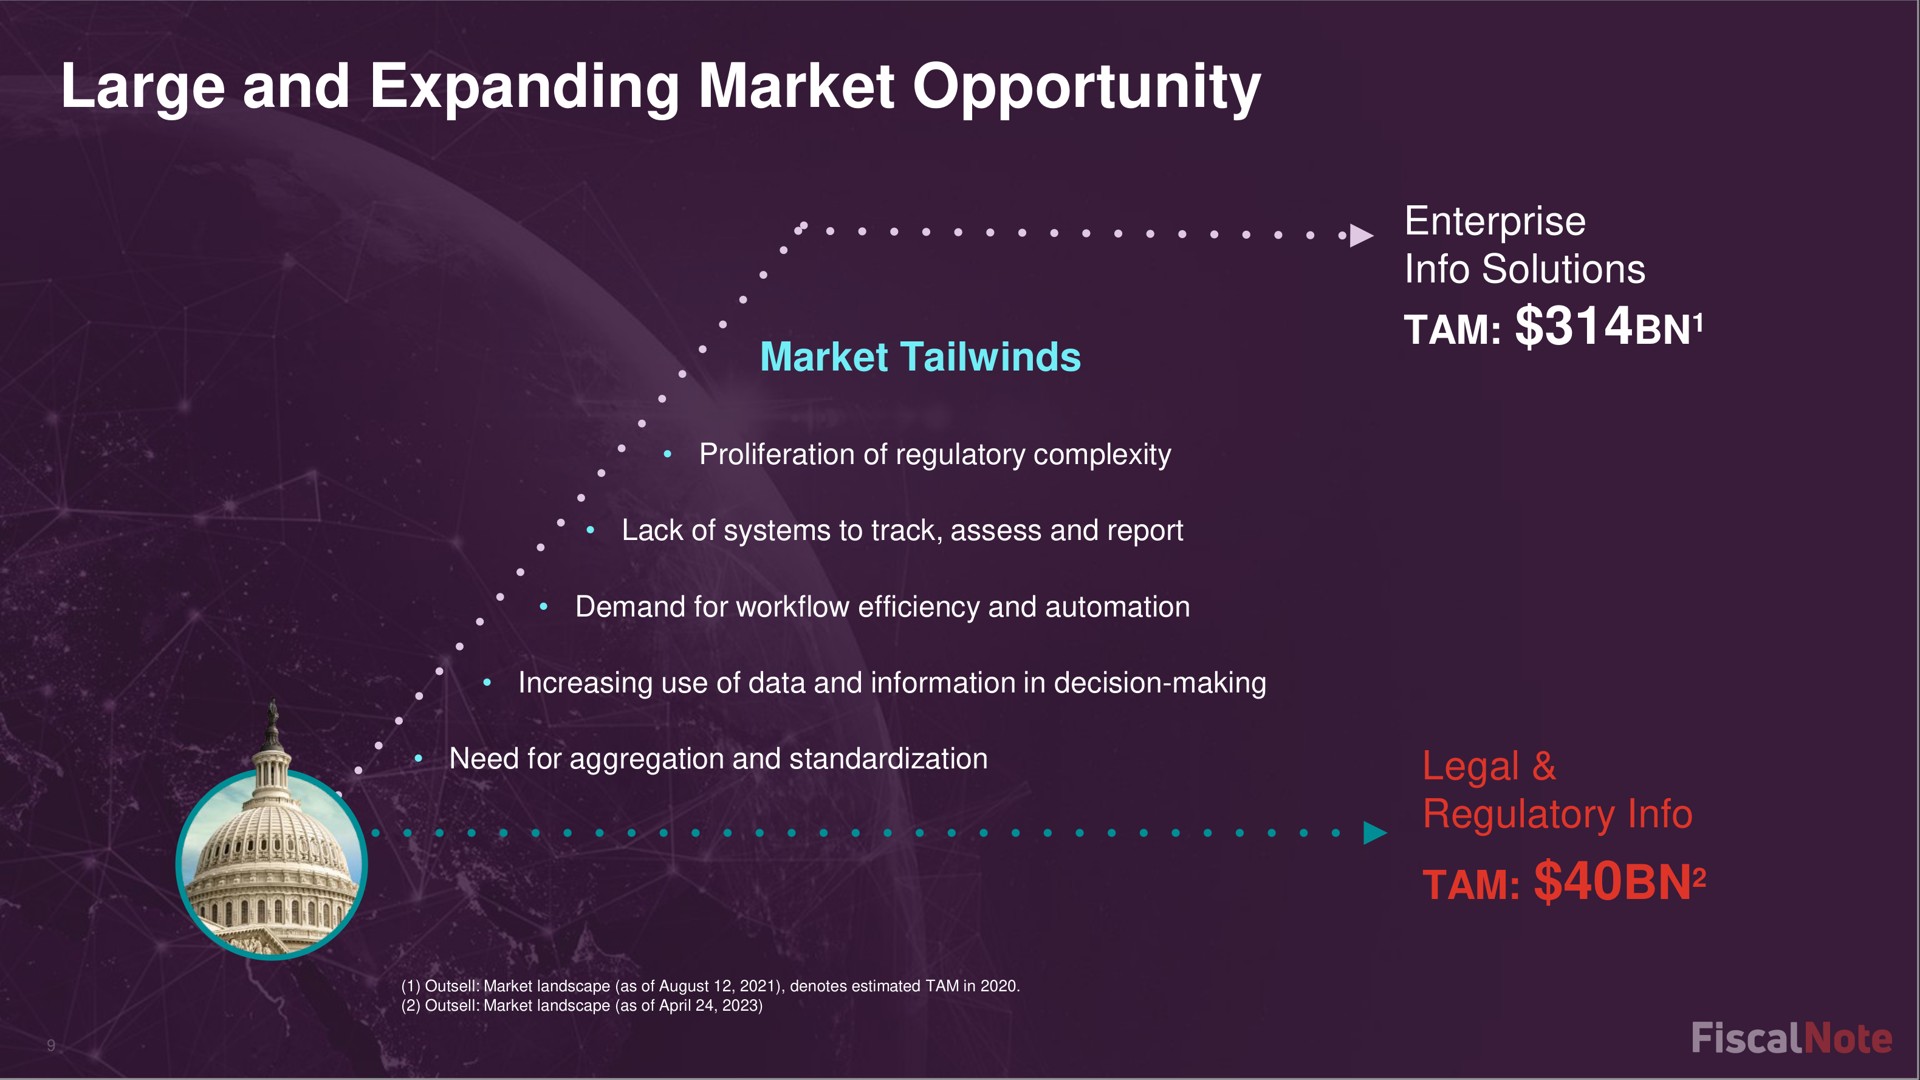 large and expanding market opportunity market enterprise solutions tam legal regulatory tam | FiscalNote